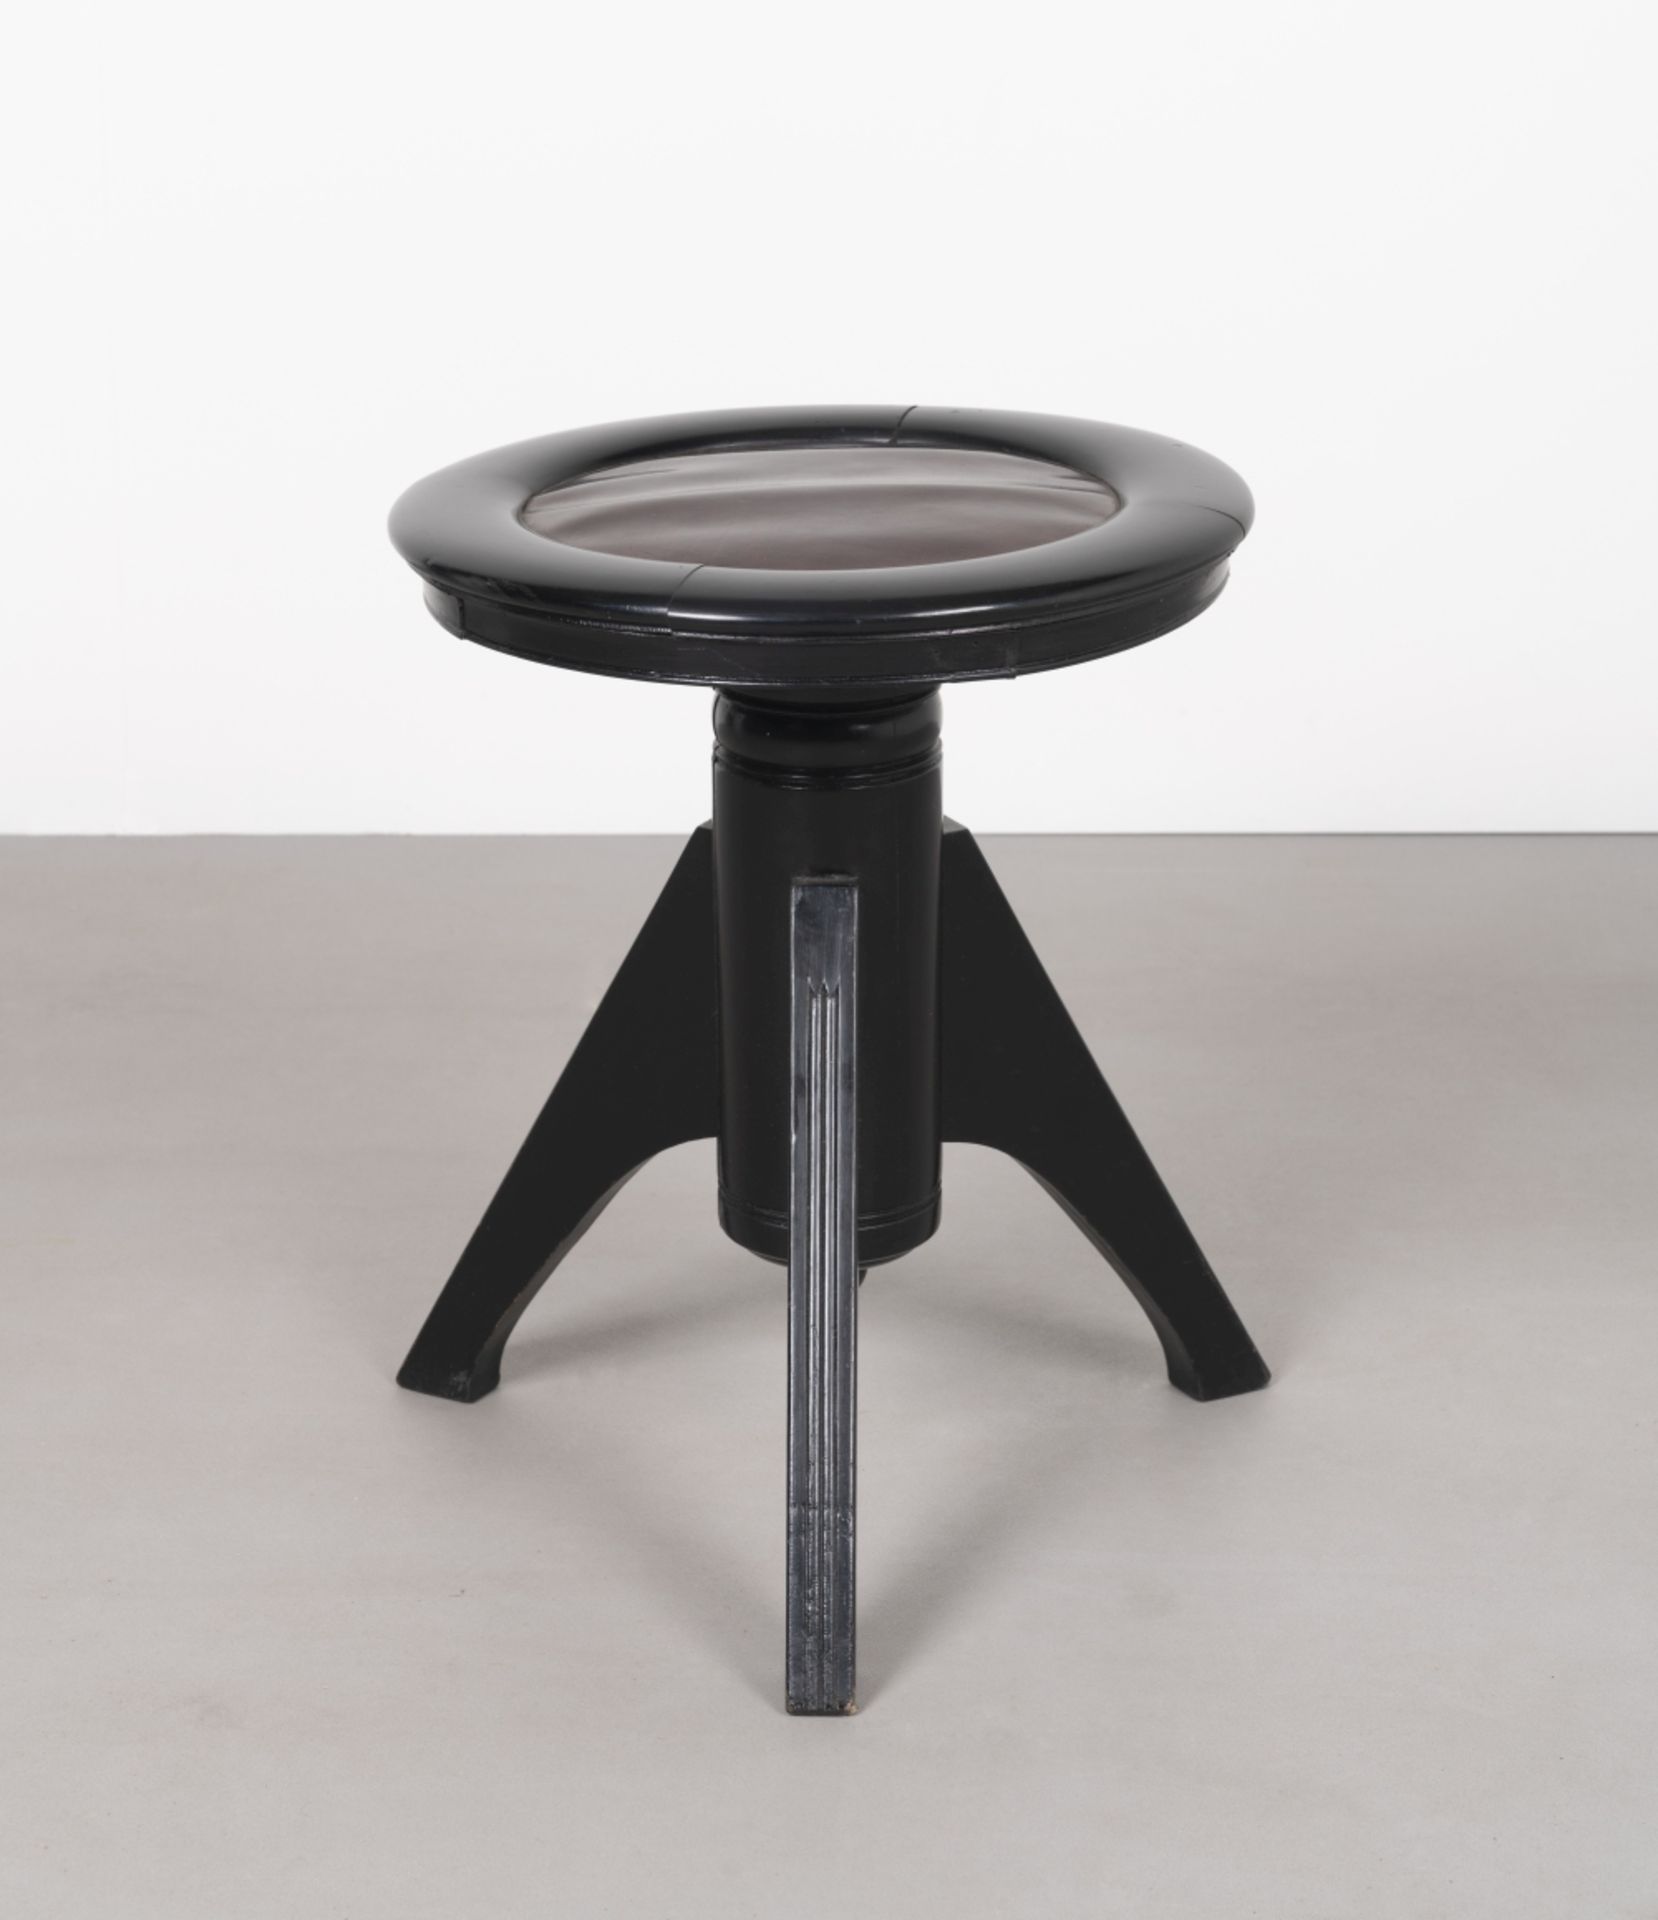 Aesthetic Movement: In the manner of E.W. Godwin Adjustable stool, circa 1875